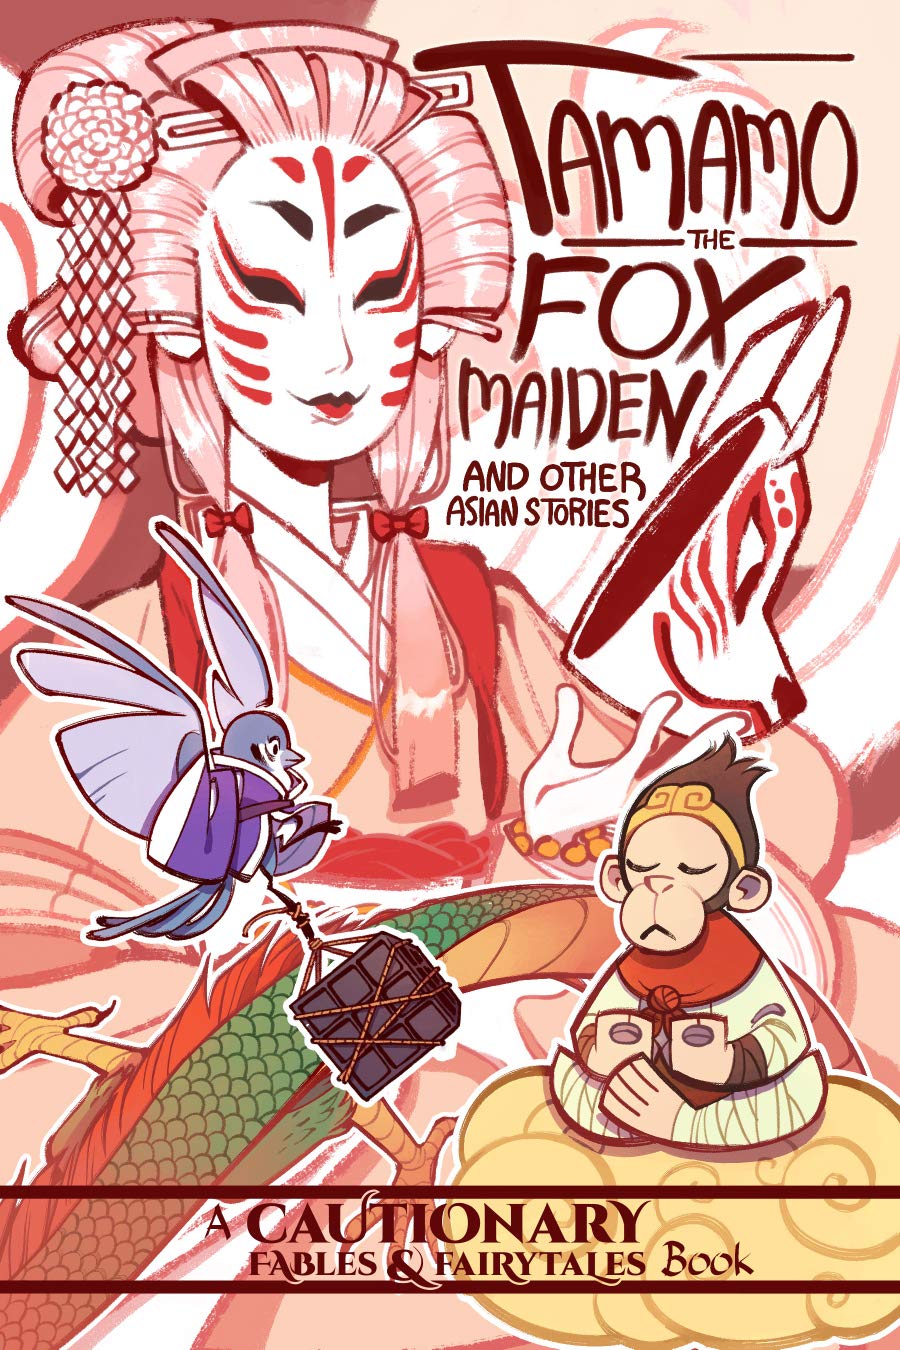 Tamamo the Fox Maiden: and Other Asian Stories